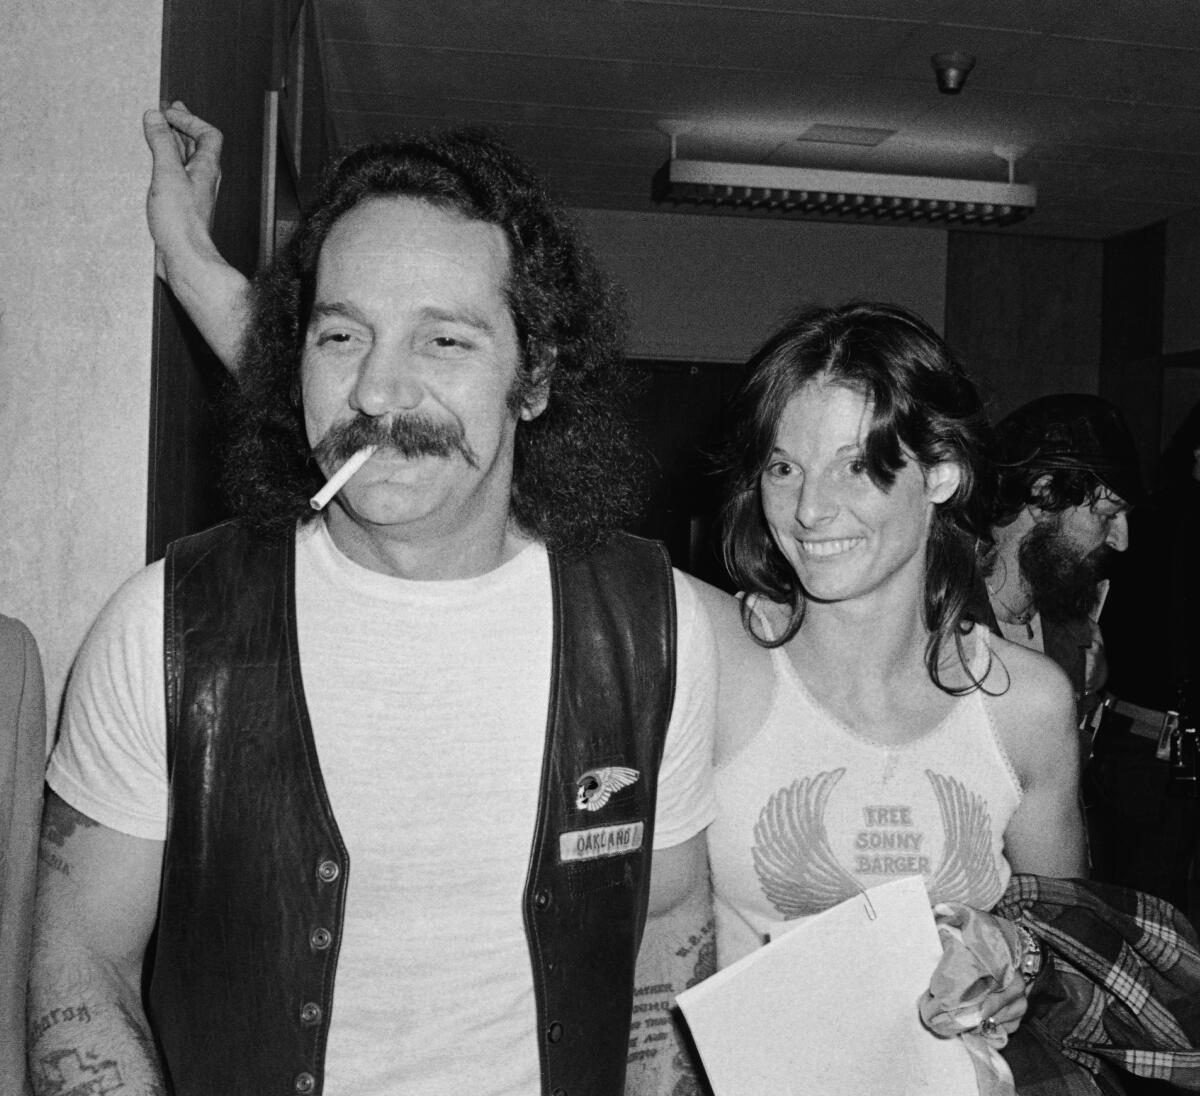 Hells Angels founder Sonny" Barger and his then-wife Sharon after his release from jail in 1980.   